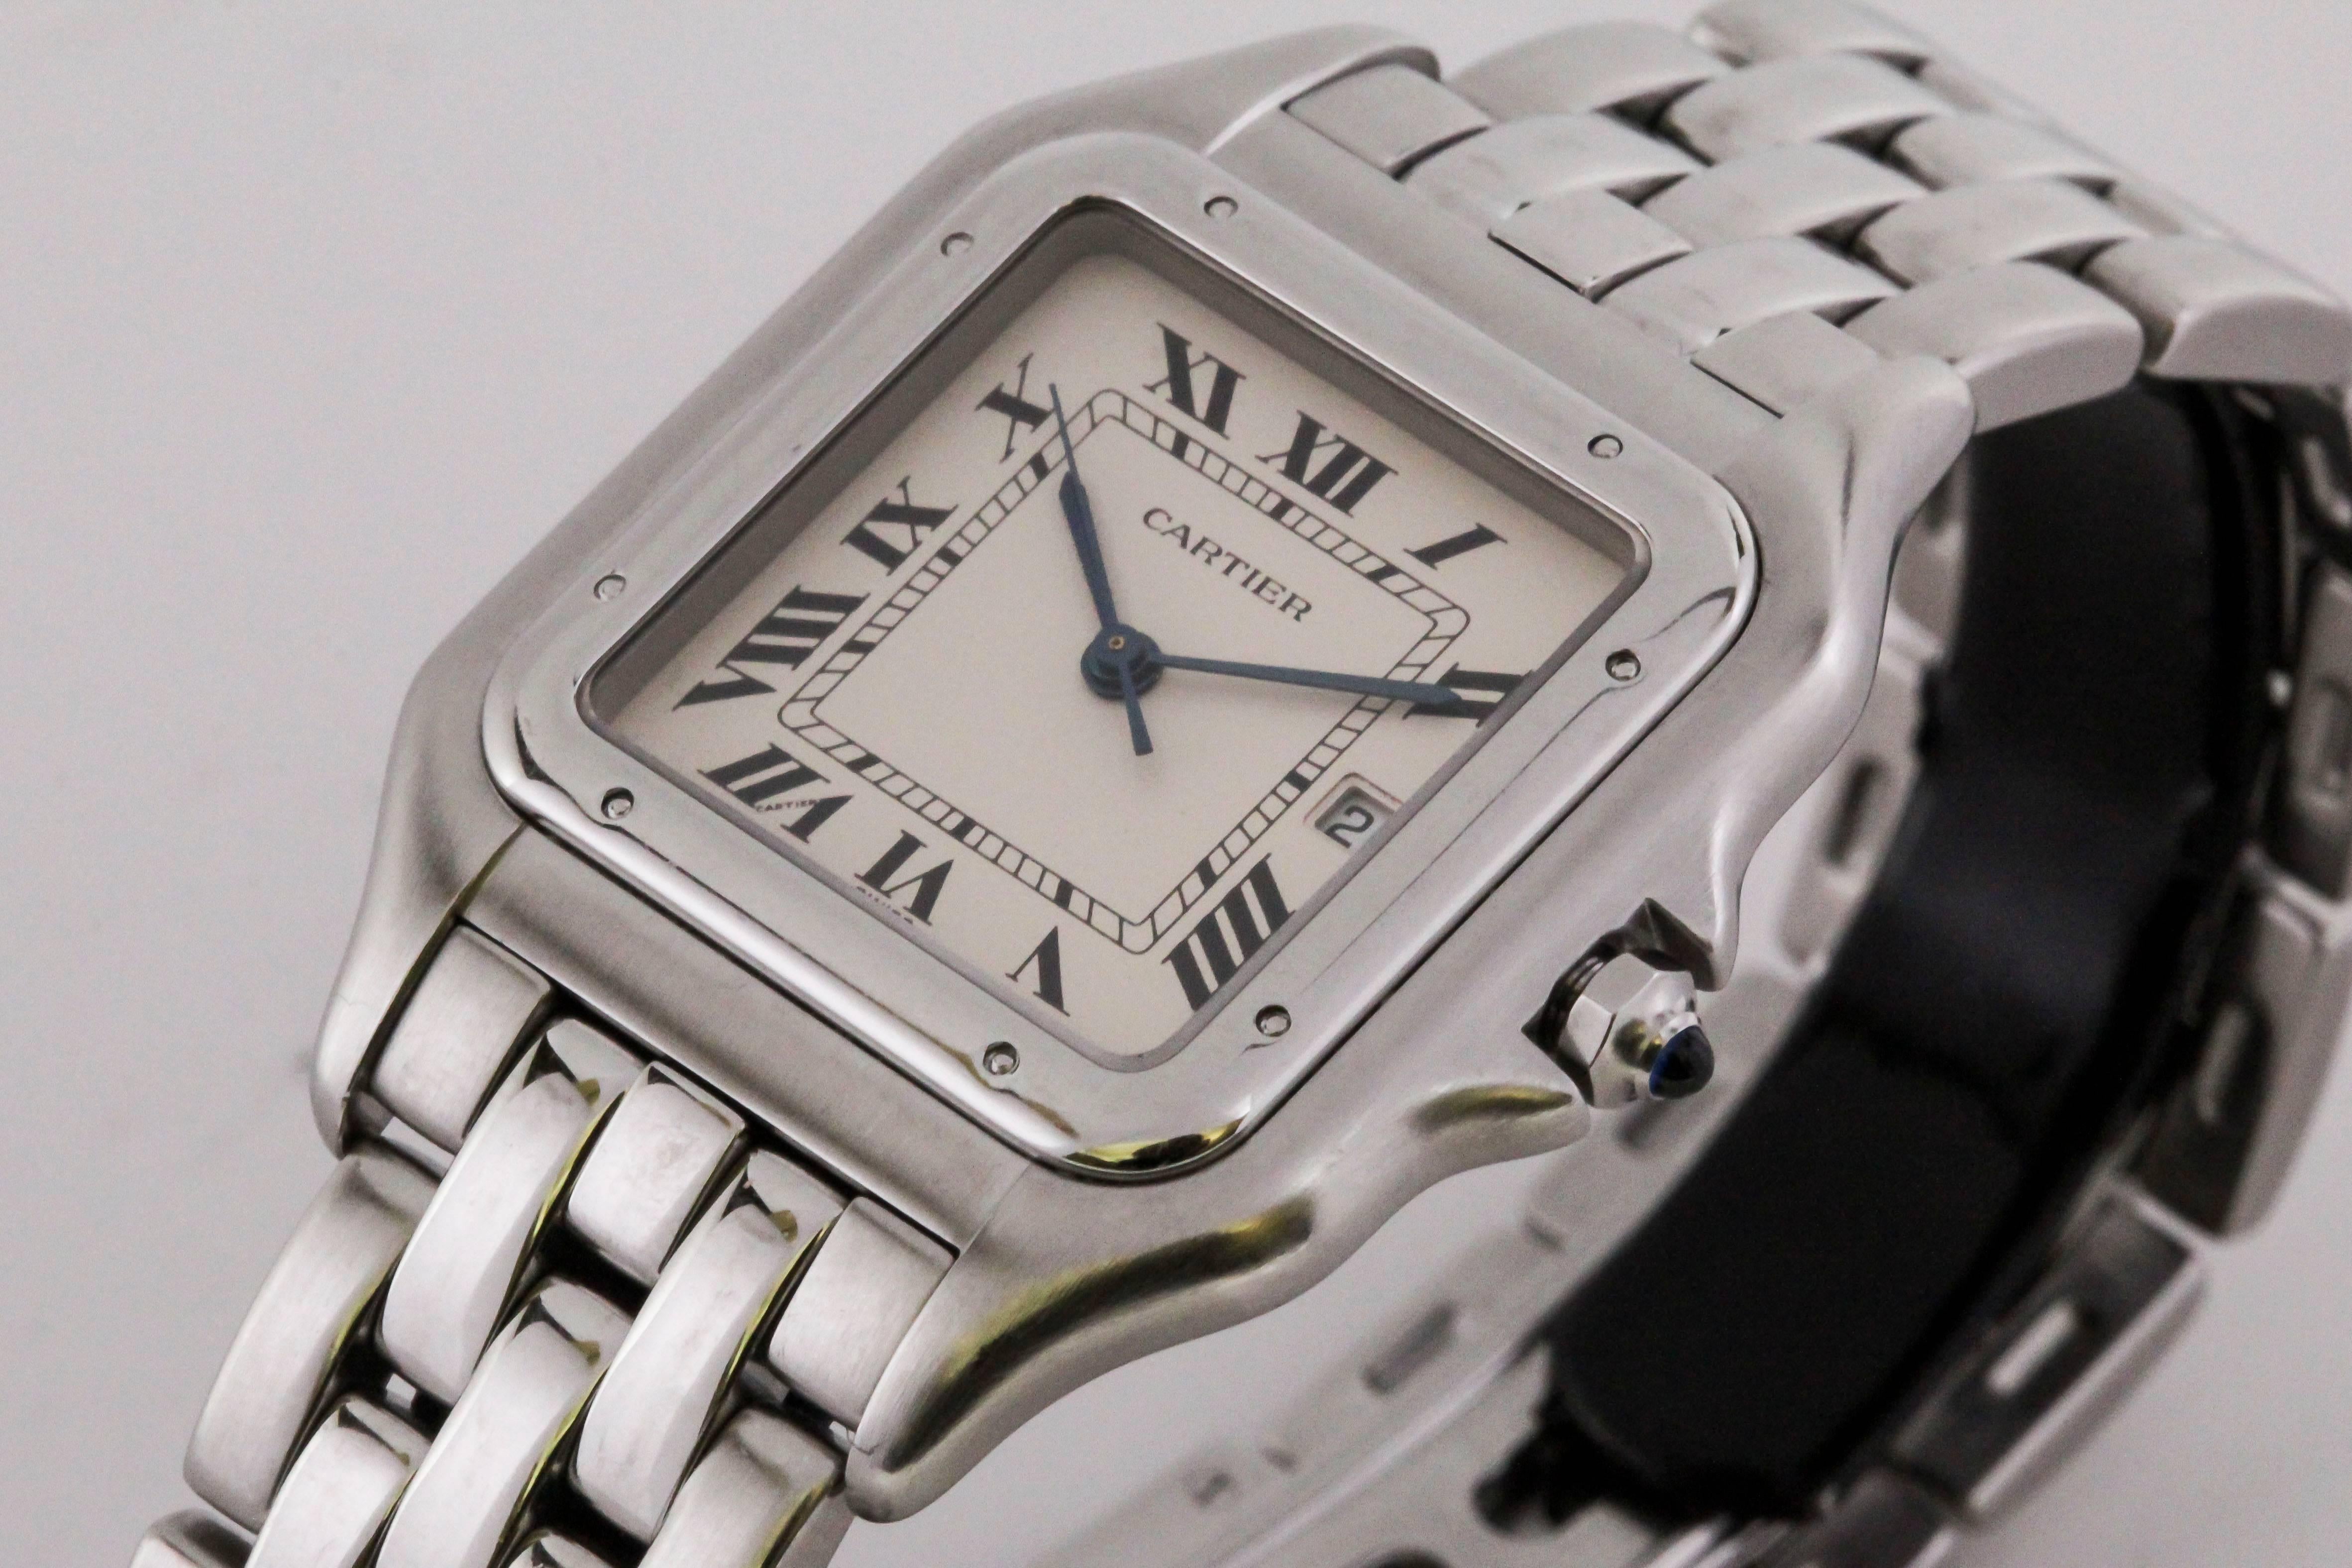 Iconic Cartier Panthere ref 1300 in stainless steel with integrated bracelet. Whether you have the small or this large size, the look and feel of this classic wristwatch makes this an easy watch for daily wear.